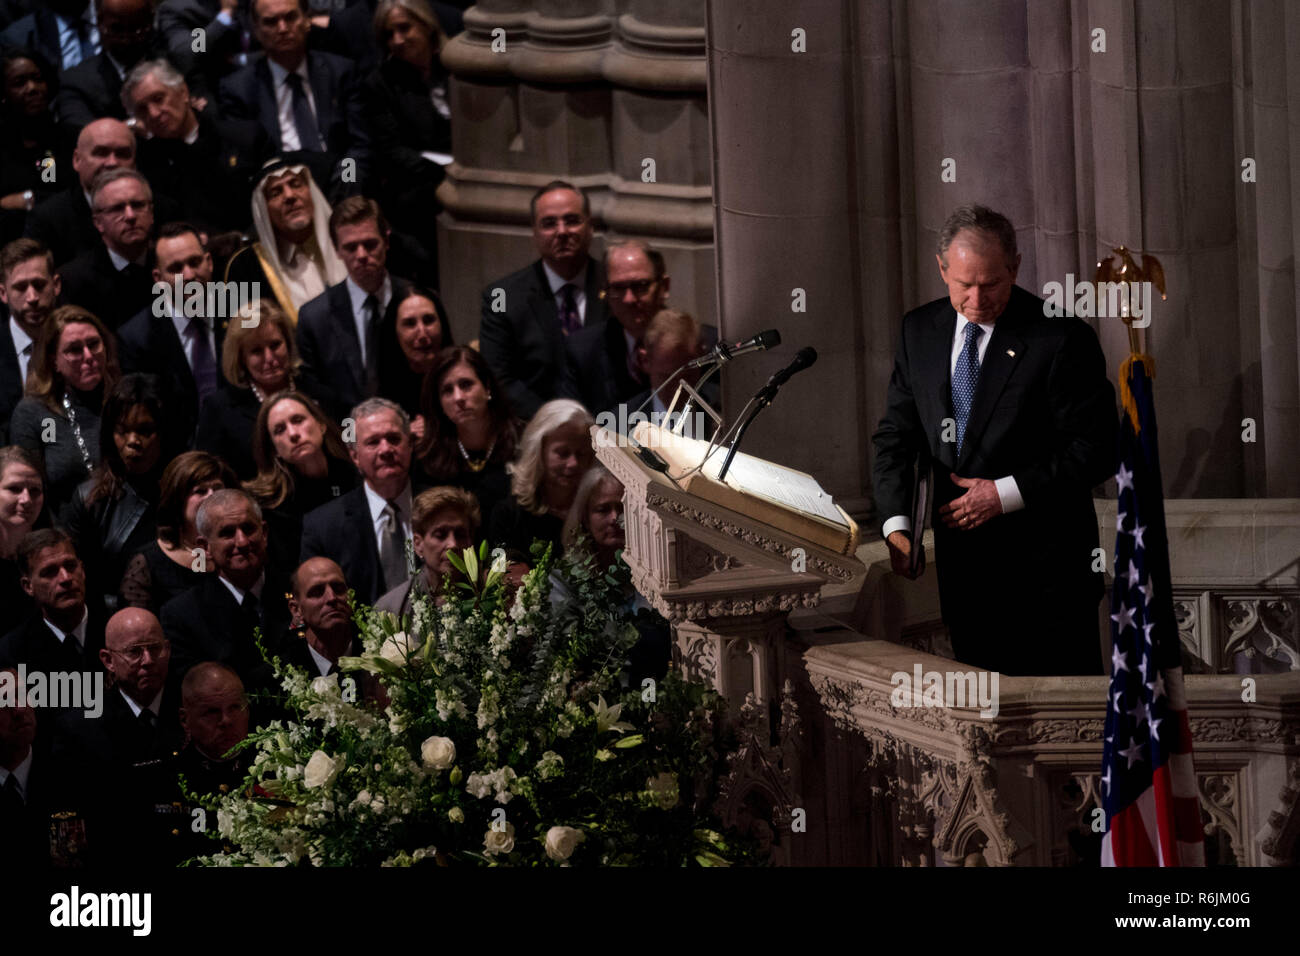 Former President George W. Bush during his eulogy of his father former president George Herbert Walker Bush during a memorial ceremony at the National Cathedral in Washington, Wednesday,  Dec.. 5, 2018.  Credit: Doug Mills / Pool via CNP / MediaPunch Stock Photo